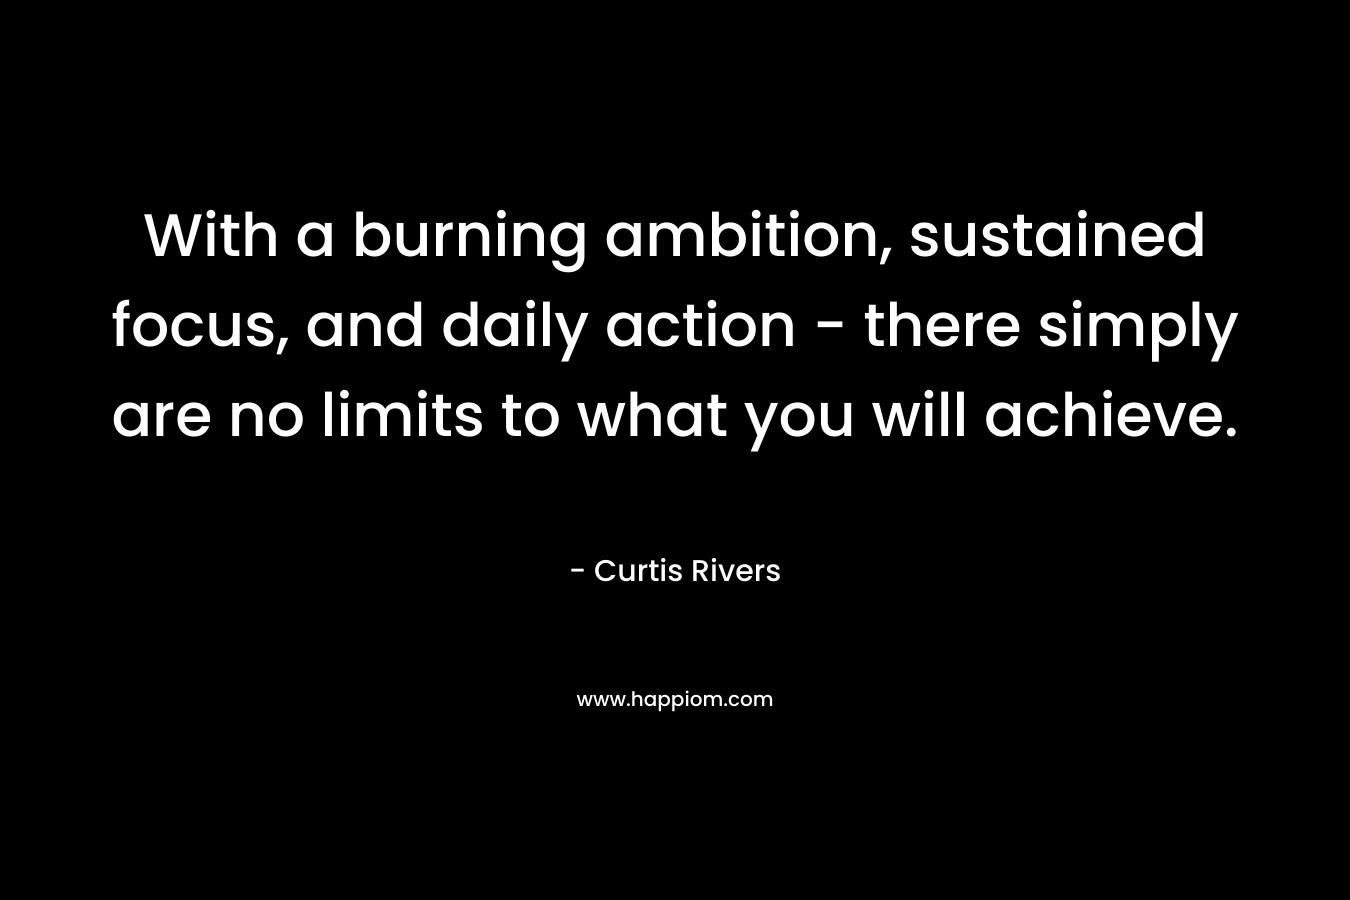 With a burning ambition, sustained focus, and daily action – there simply are no limits to what you will achieve. – Curtis Rivers